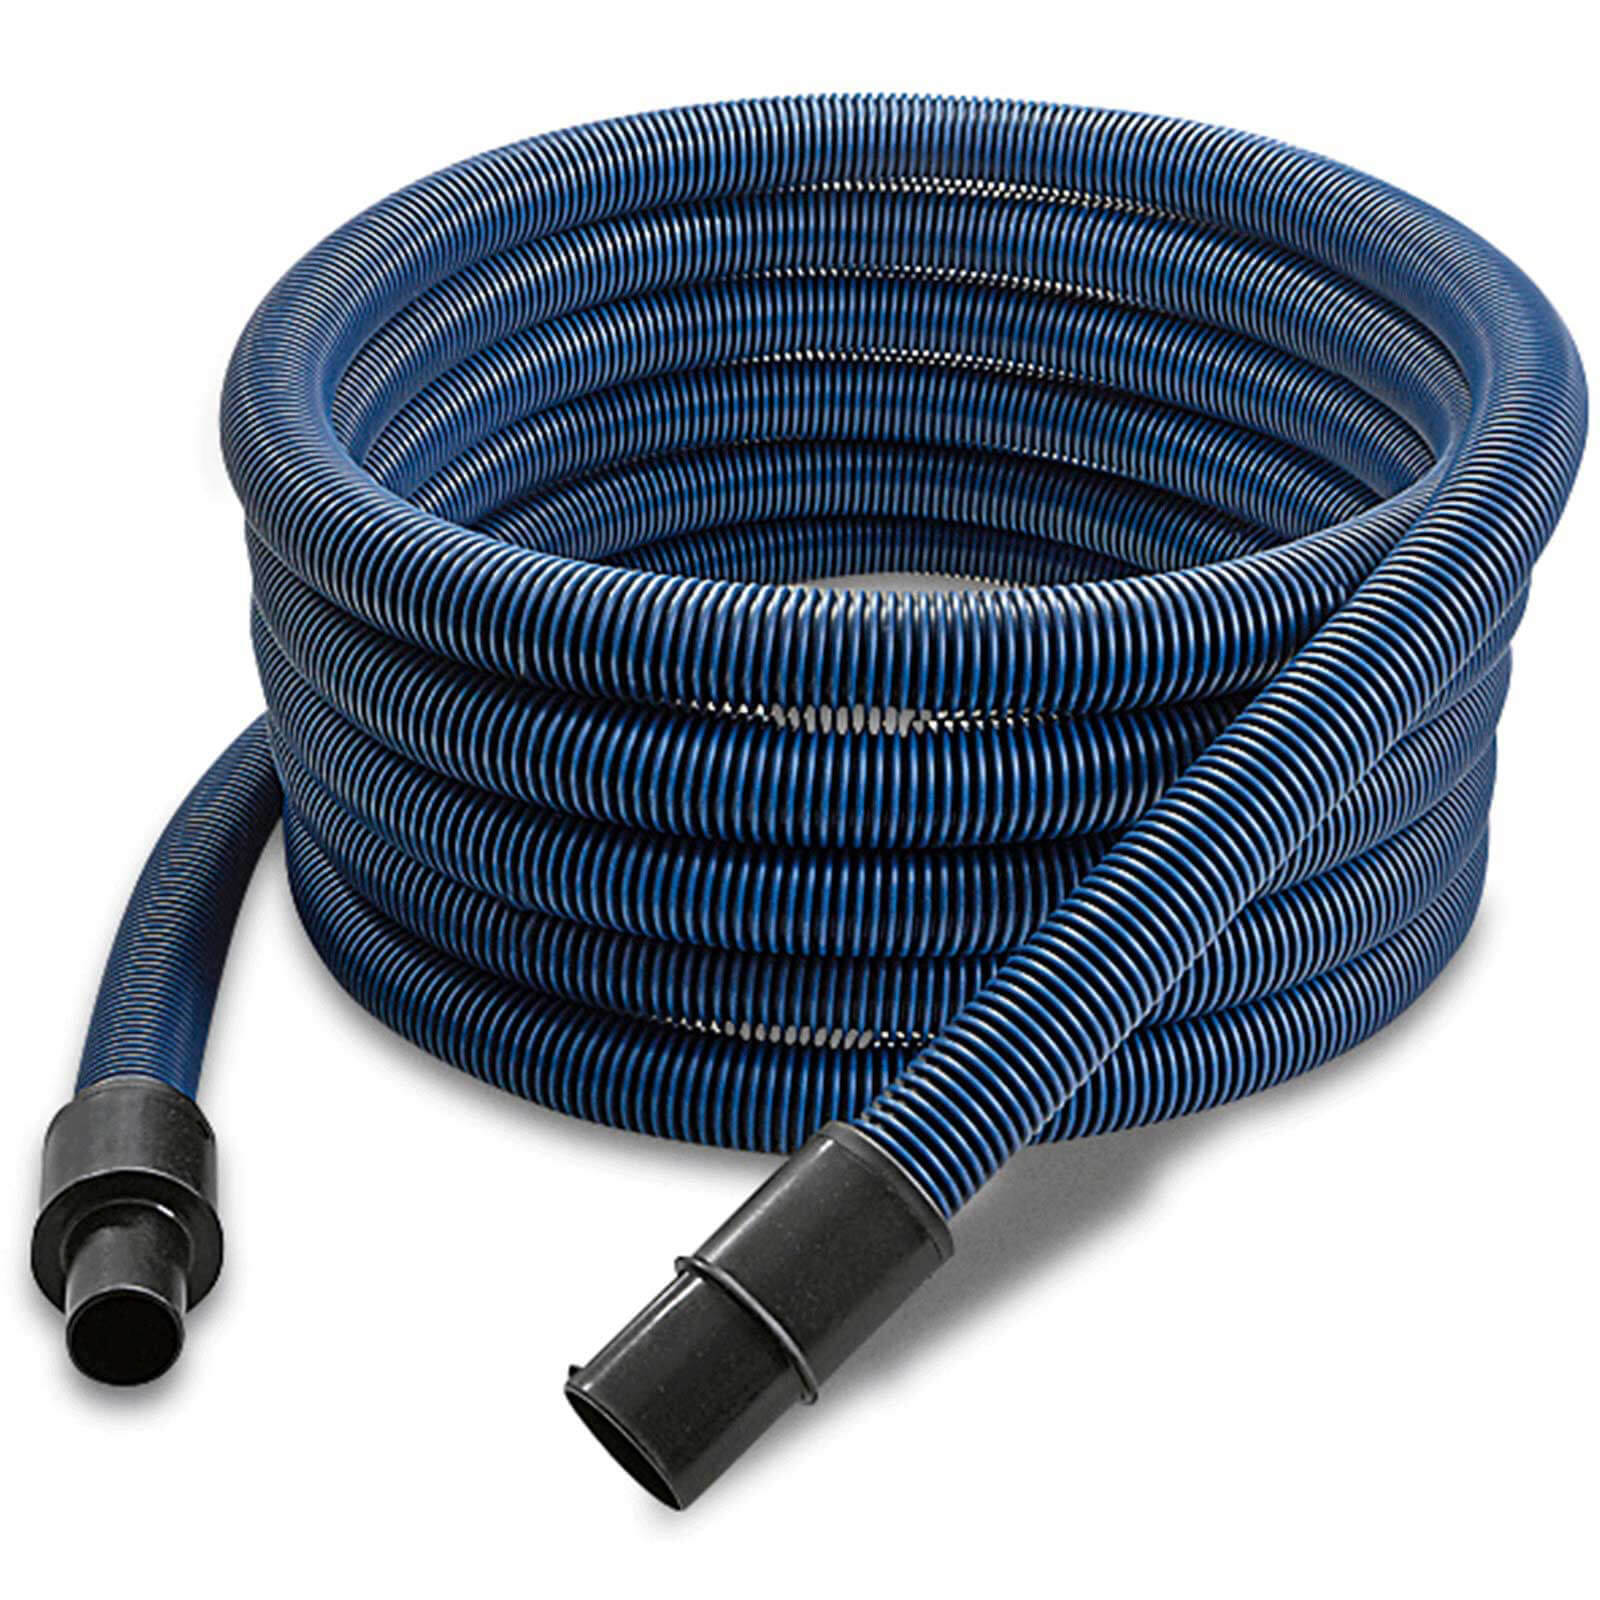 Image of Karcher Oil Resistant Suction Hose for NT 65/2 and 70/2 Vacuum Cleaners 40mm 10m